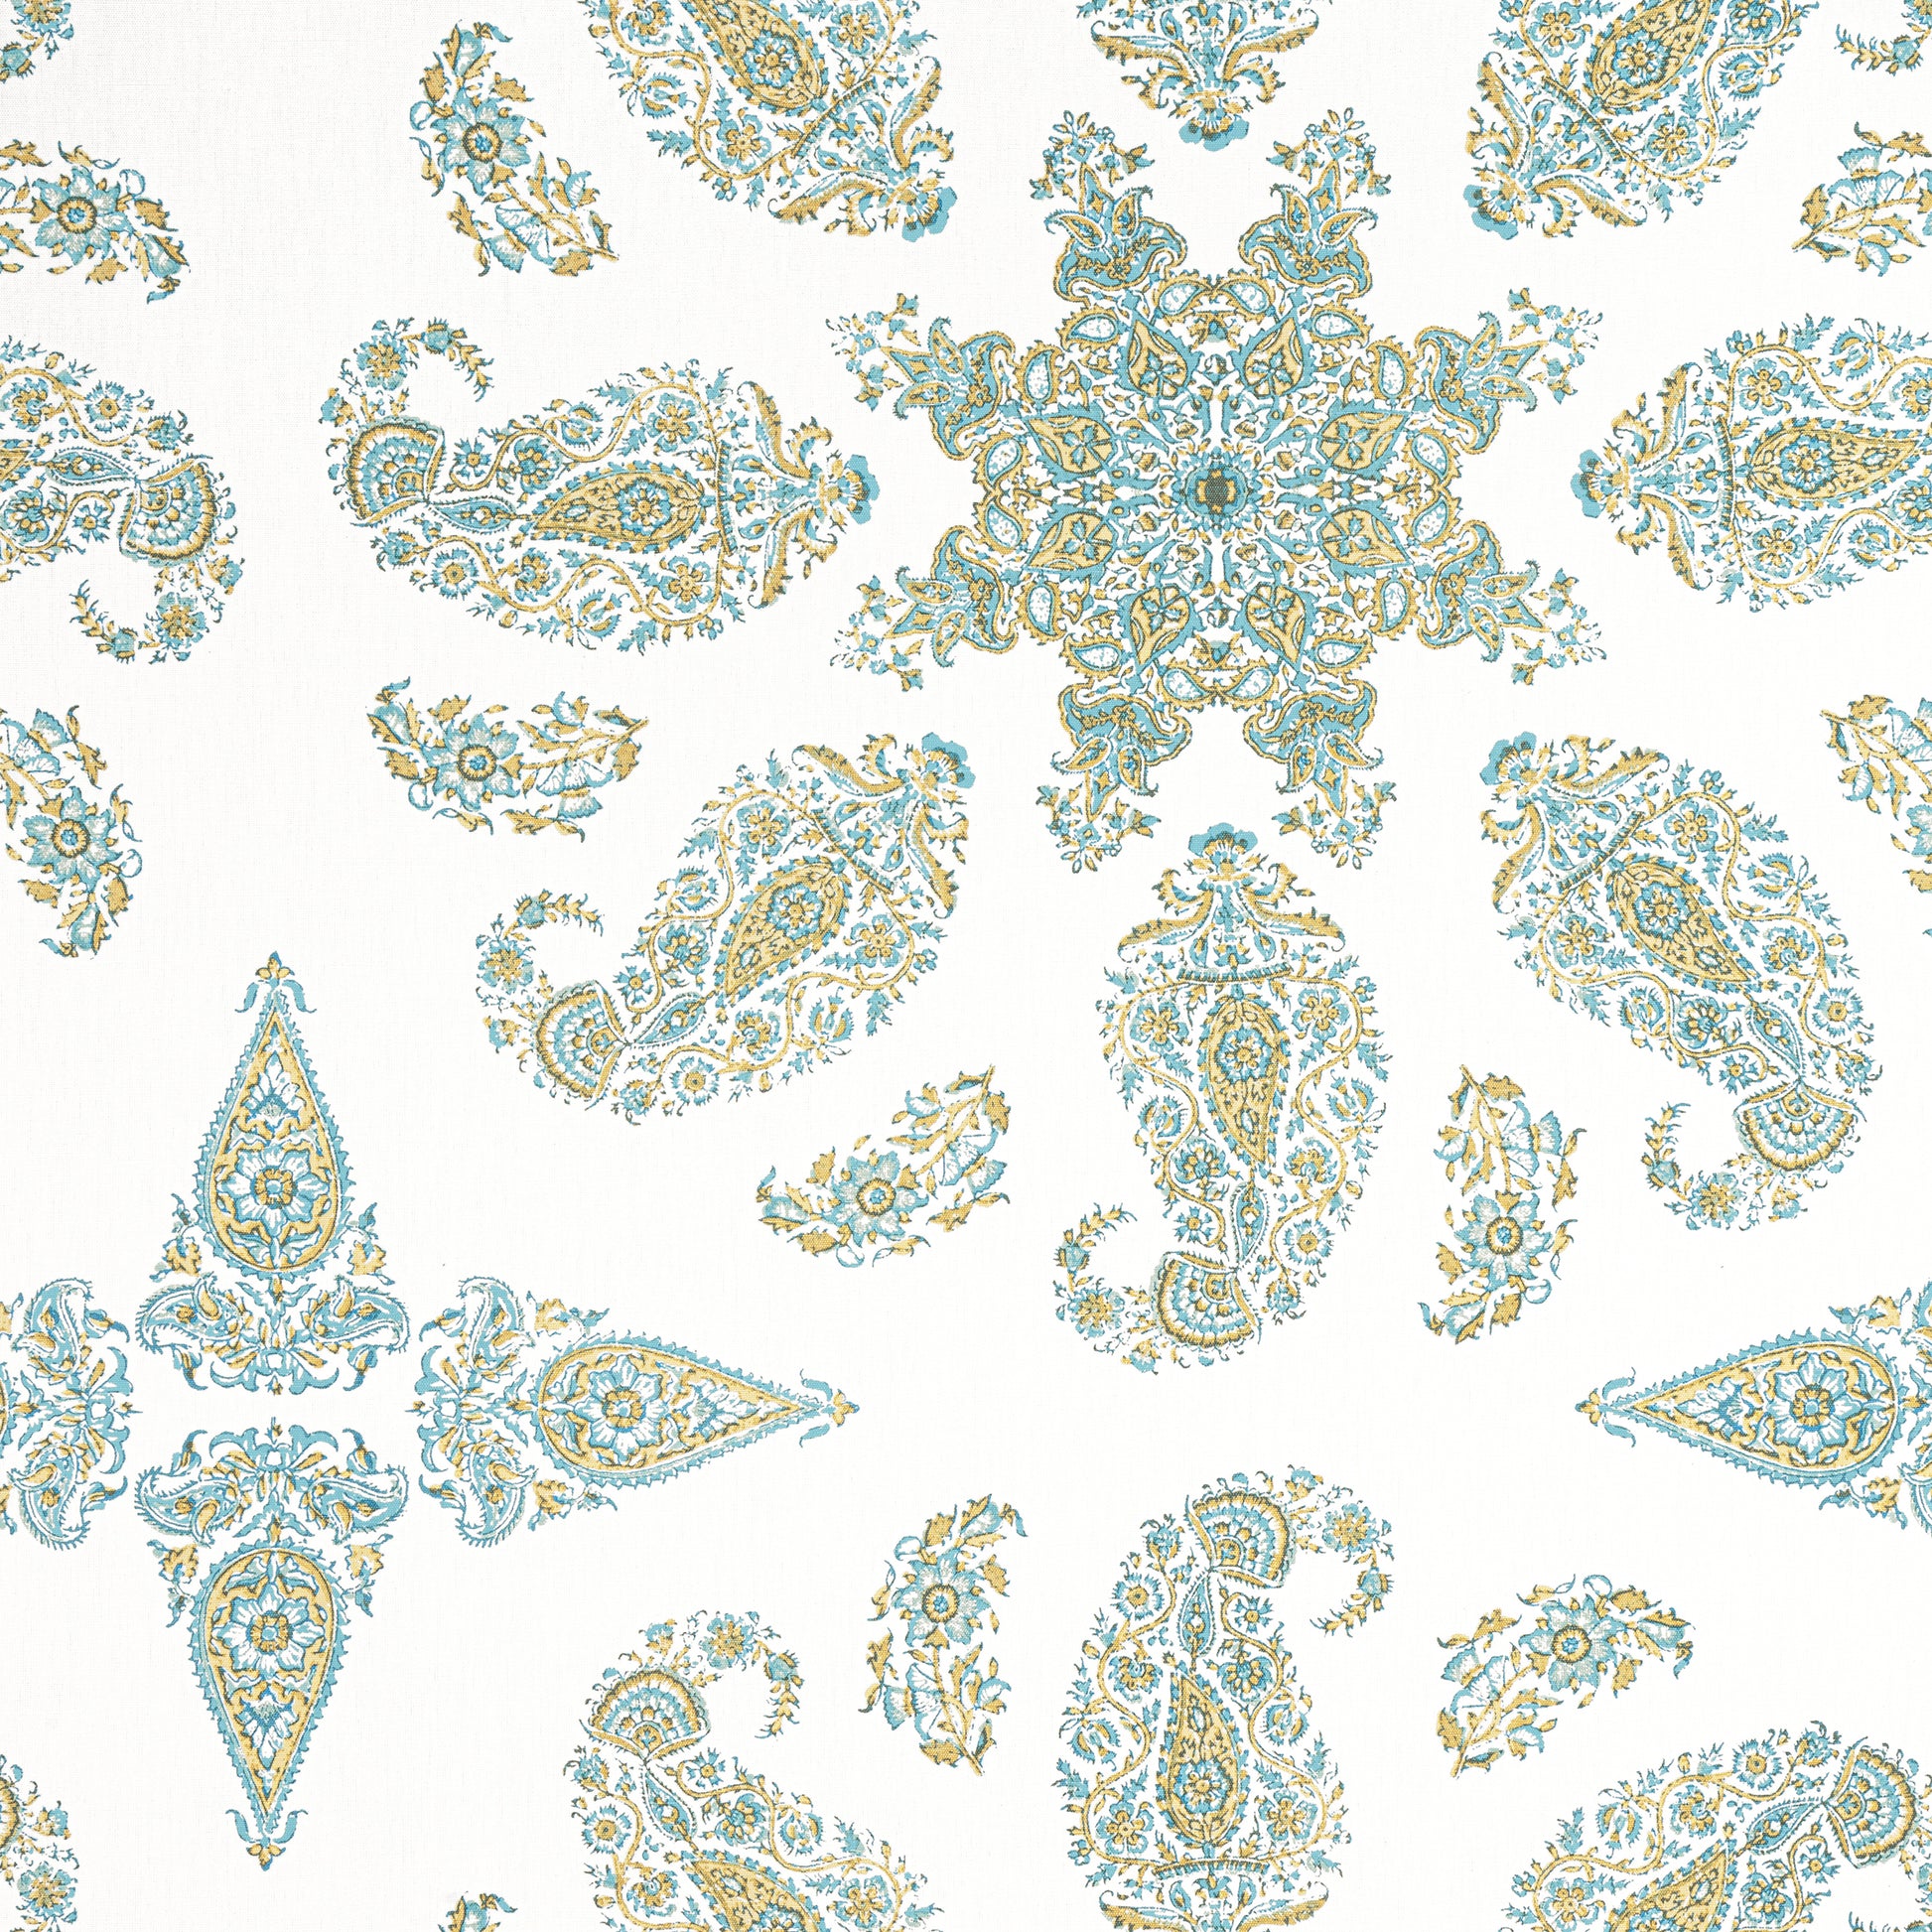 Purchase Thibaut Fabric Item# F936428 pattern name East India color Seaglass